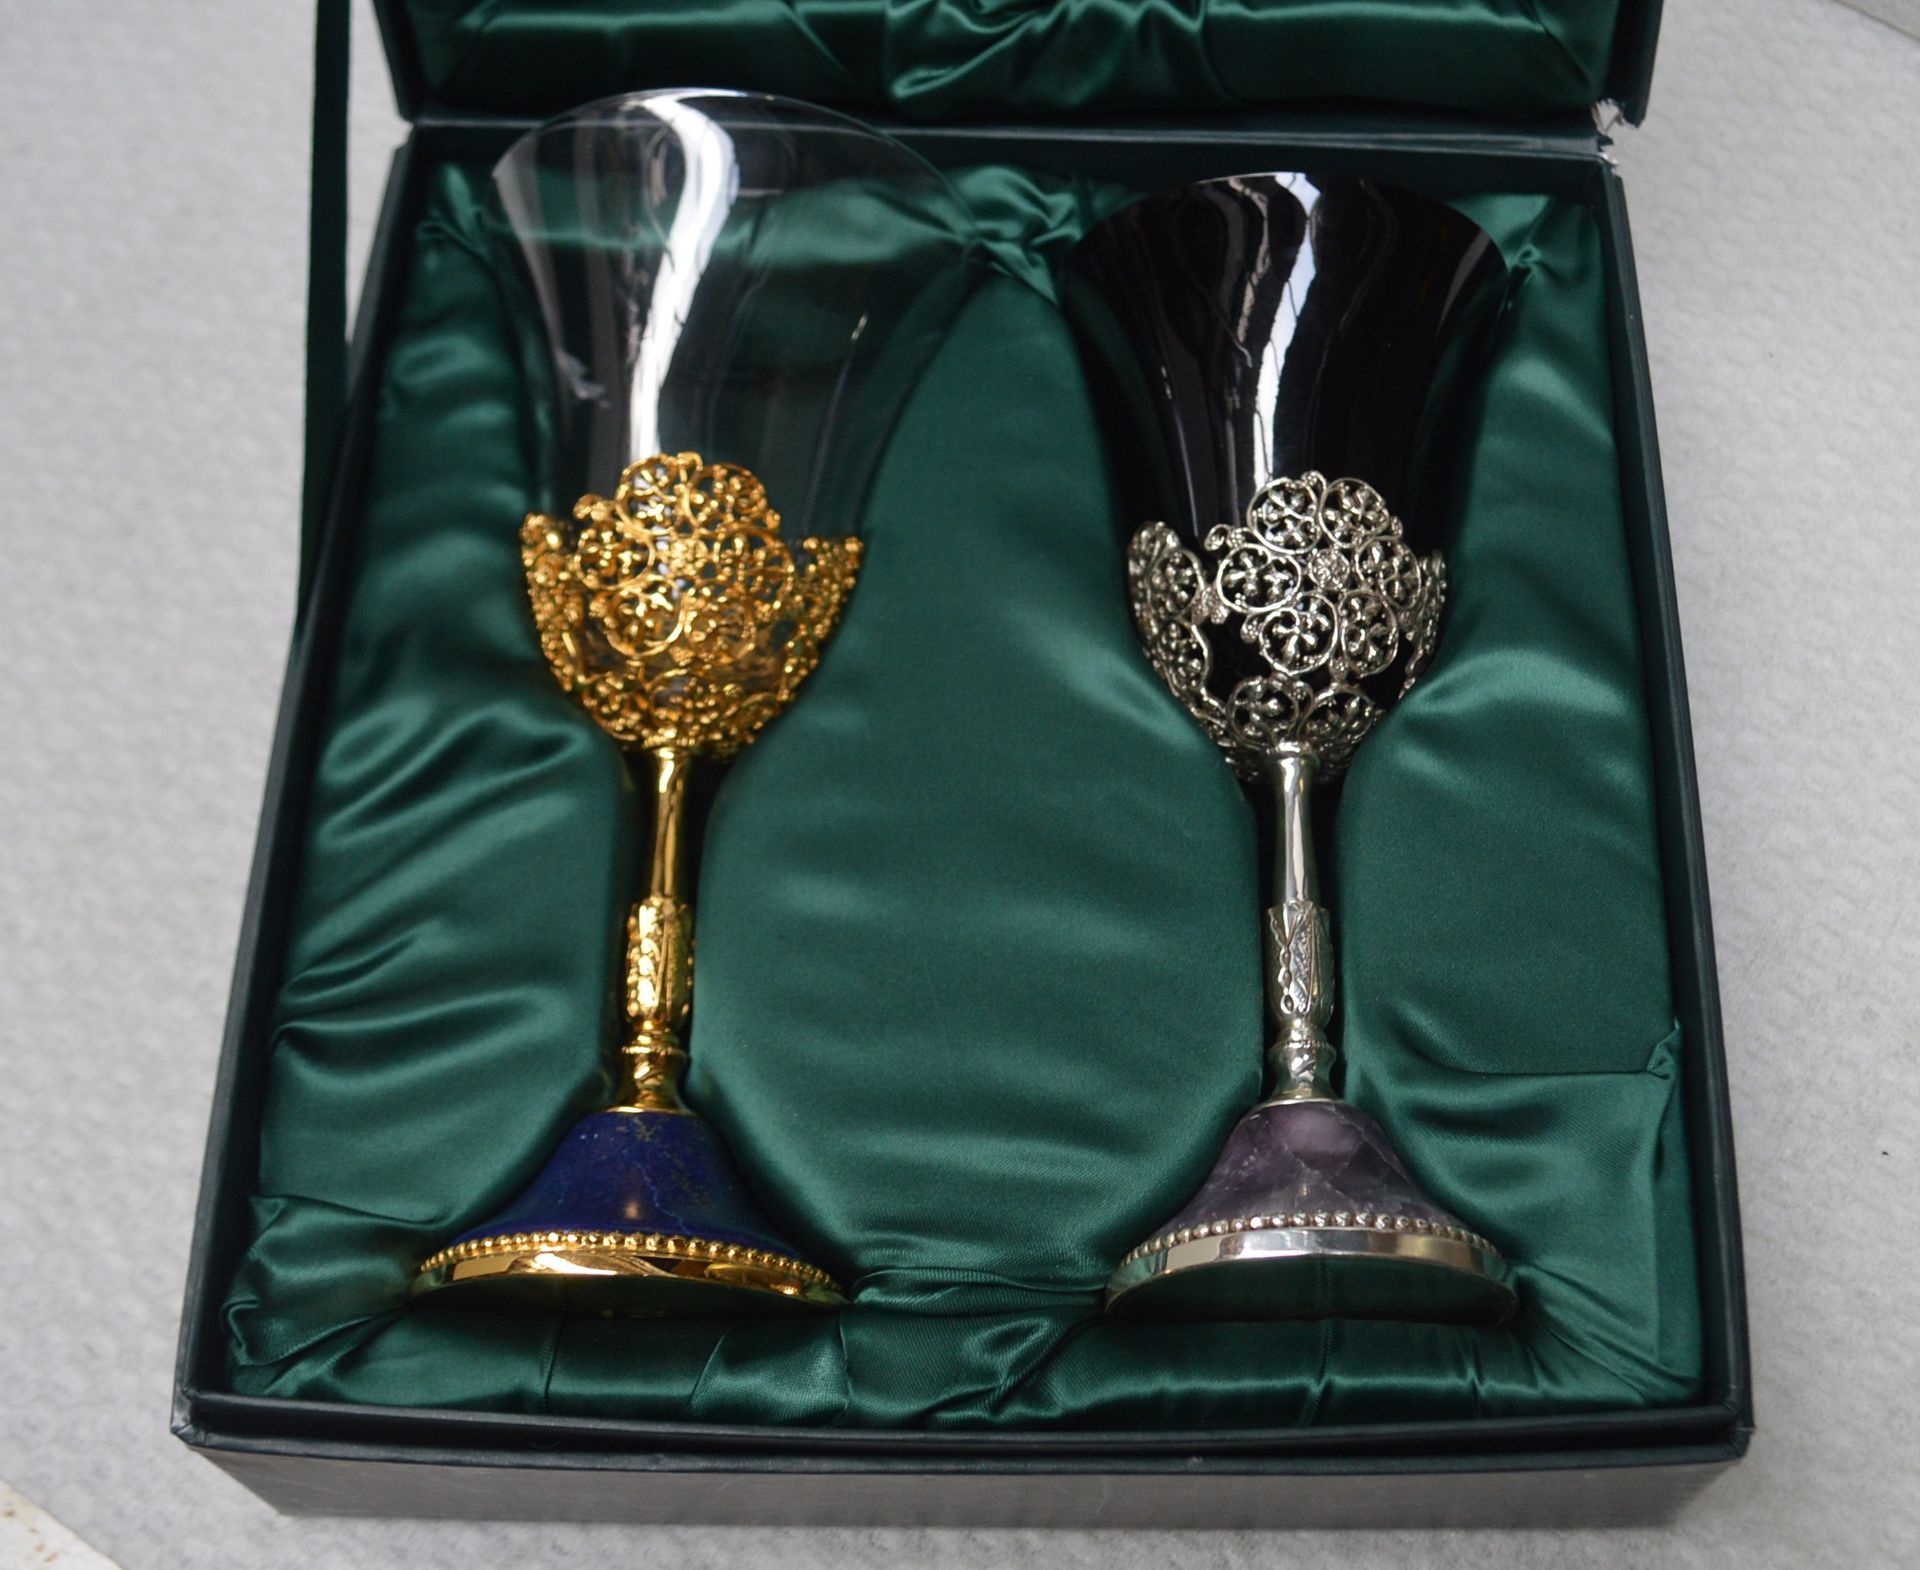 2 x BALDI 'Home Jewels' Italian Hand-crafted Crystal FONTAINEBLEAU Water Goblets - RRP £1,289 - Image 4 of 4